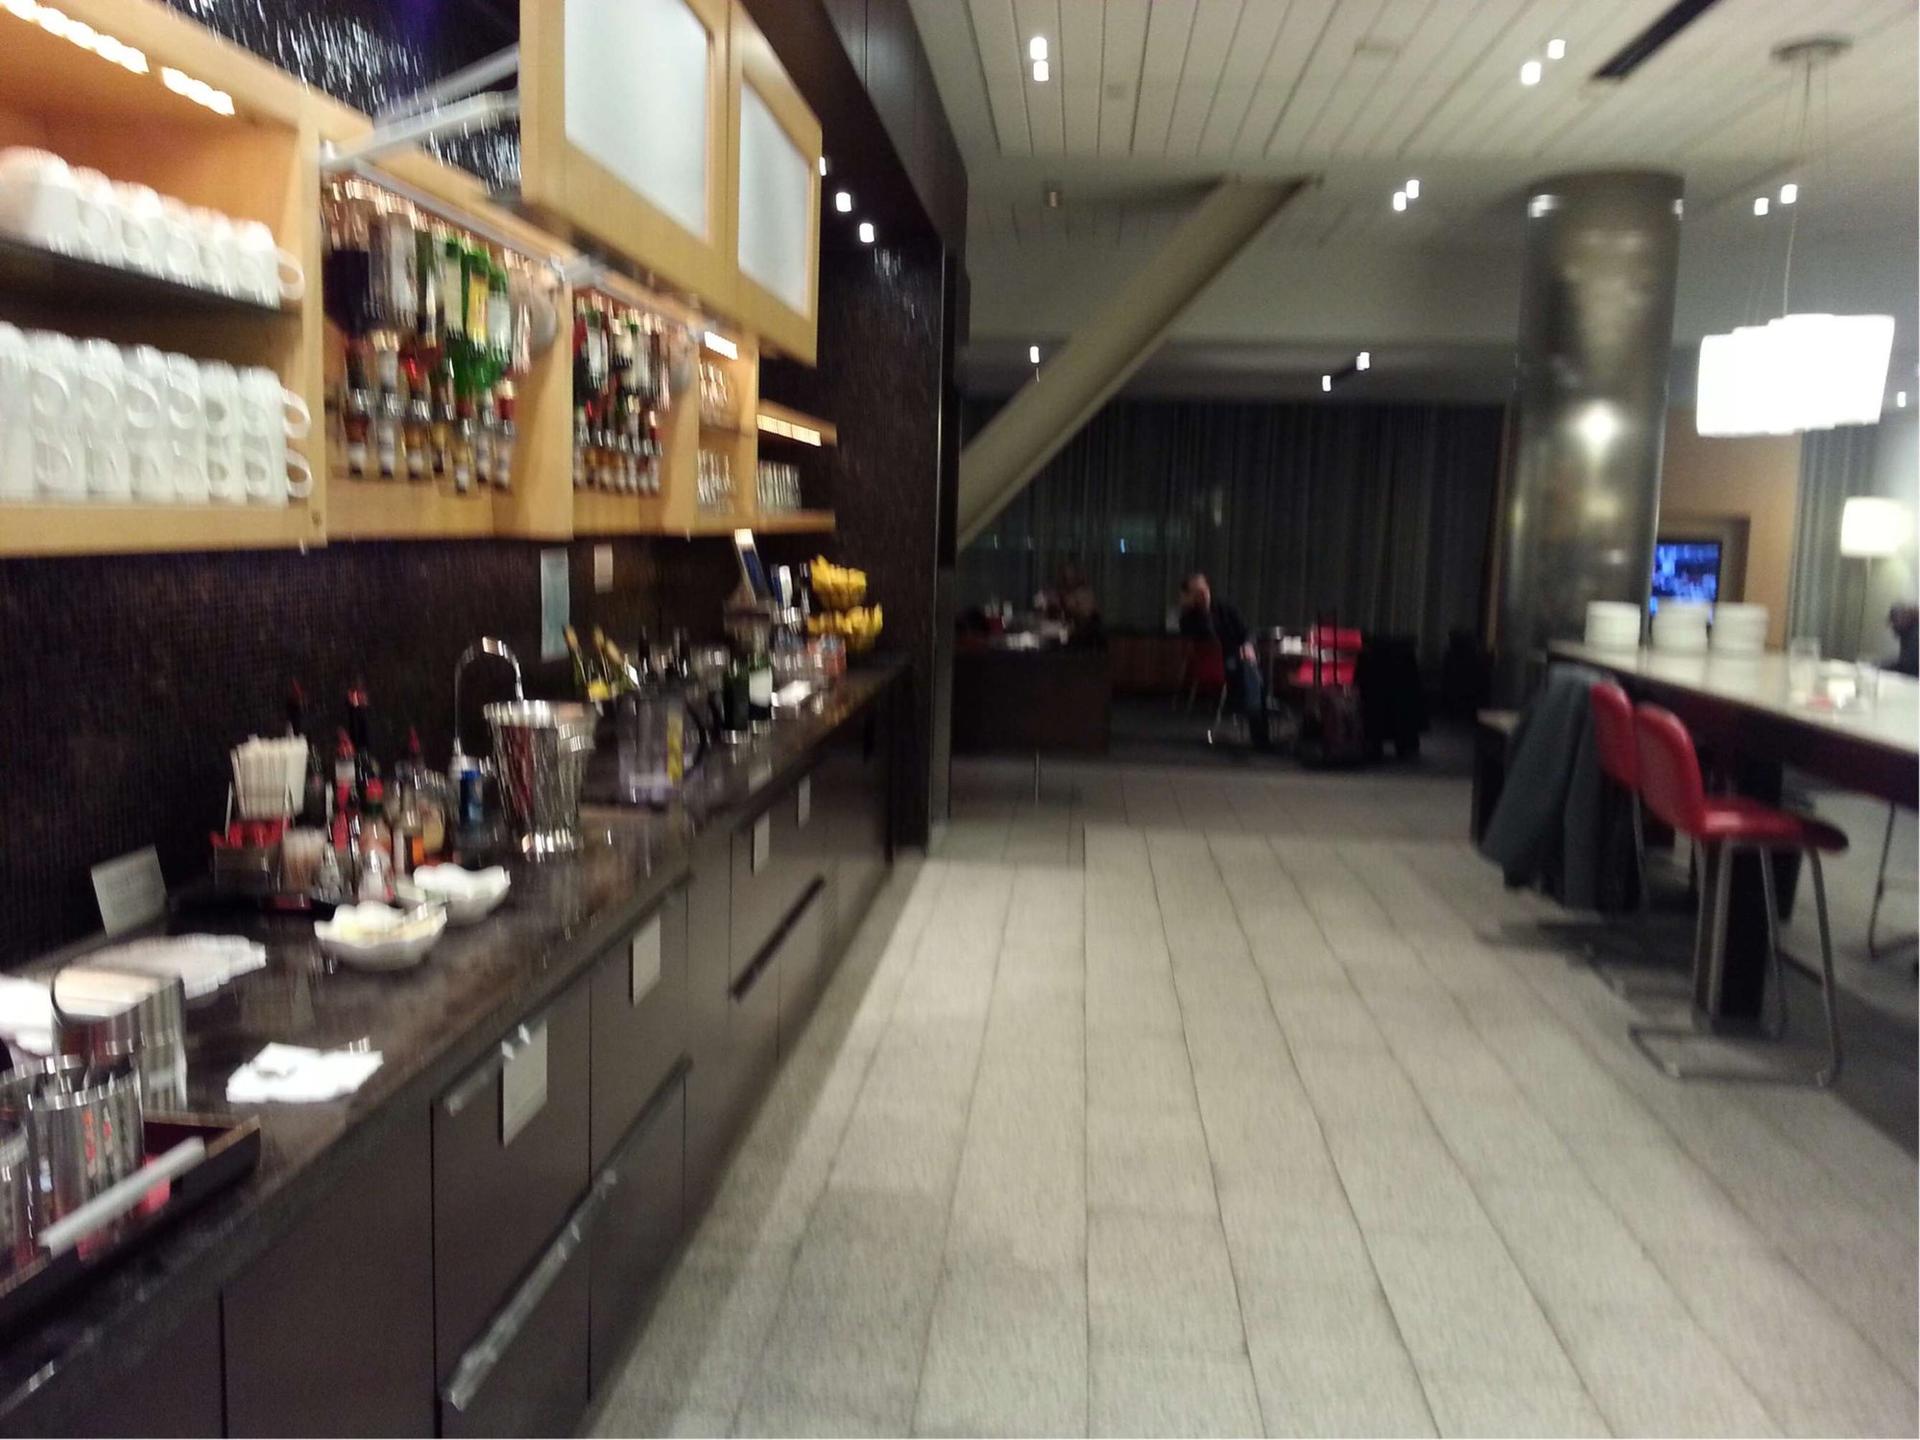 Air Canada Maple Leaf Lounge image 14 of 21